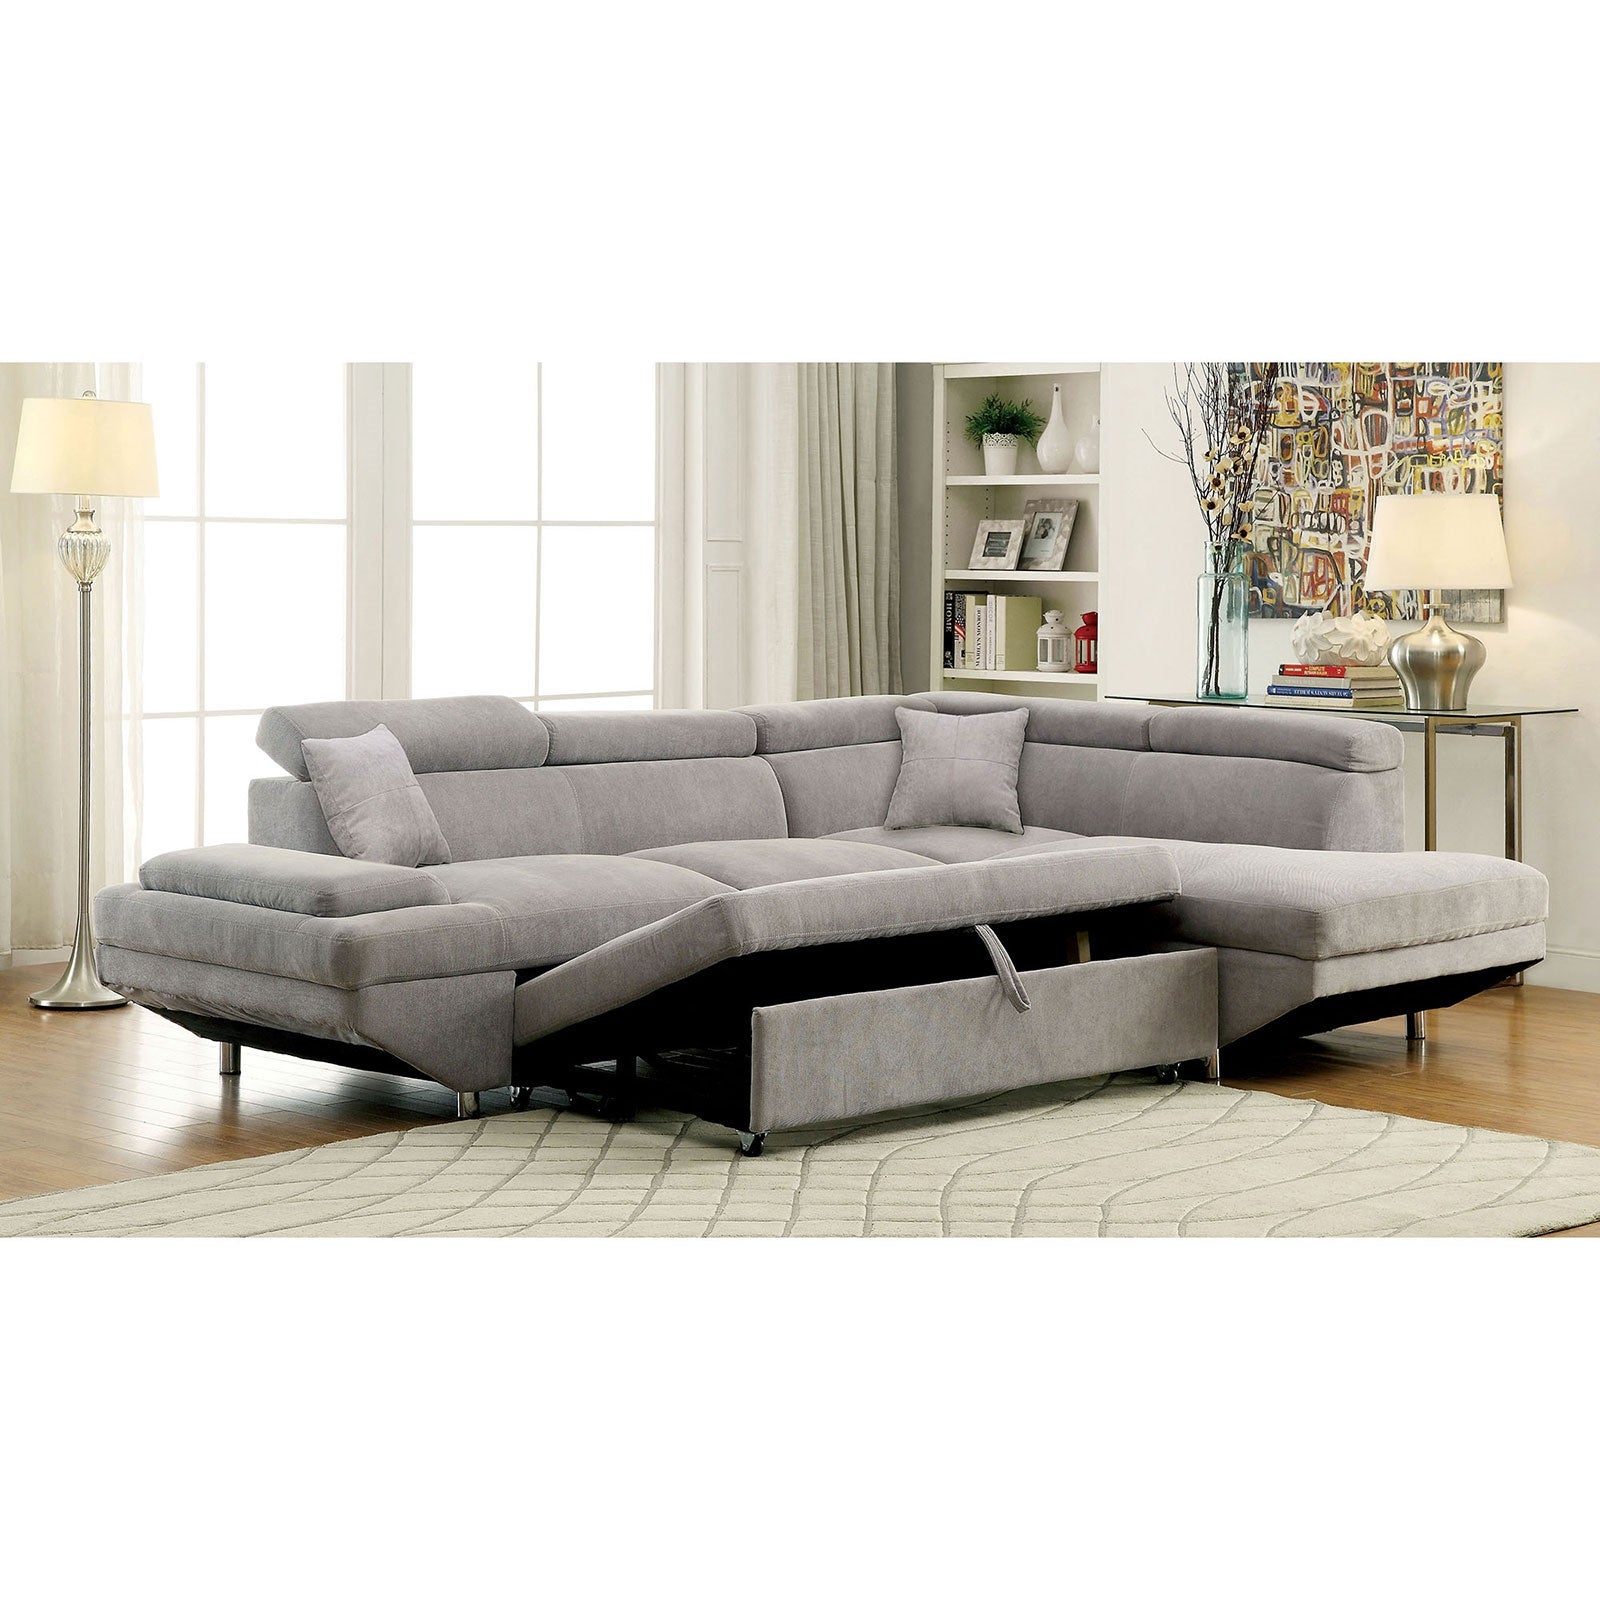 Foreman Plush Black Sectional W- Pull Out Sleeper